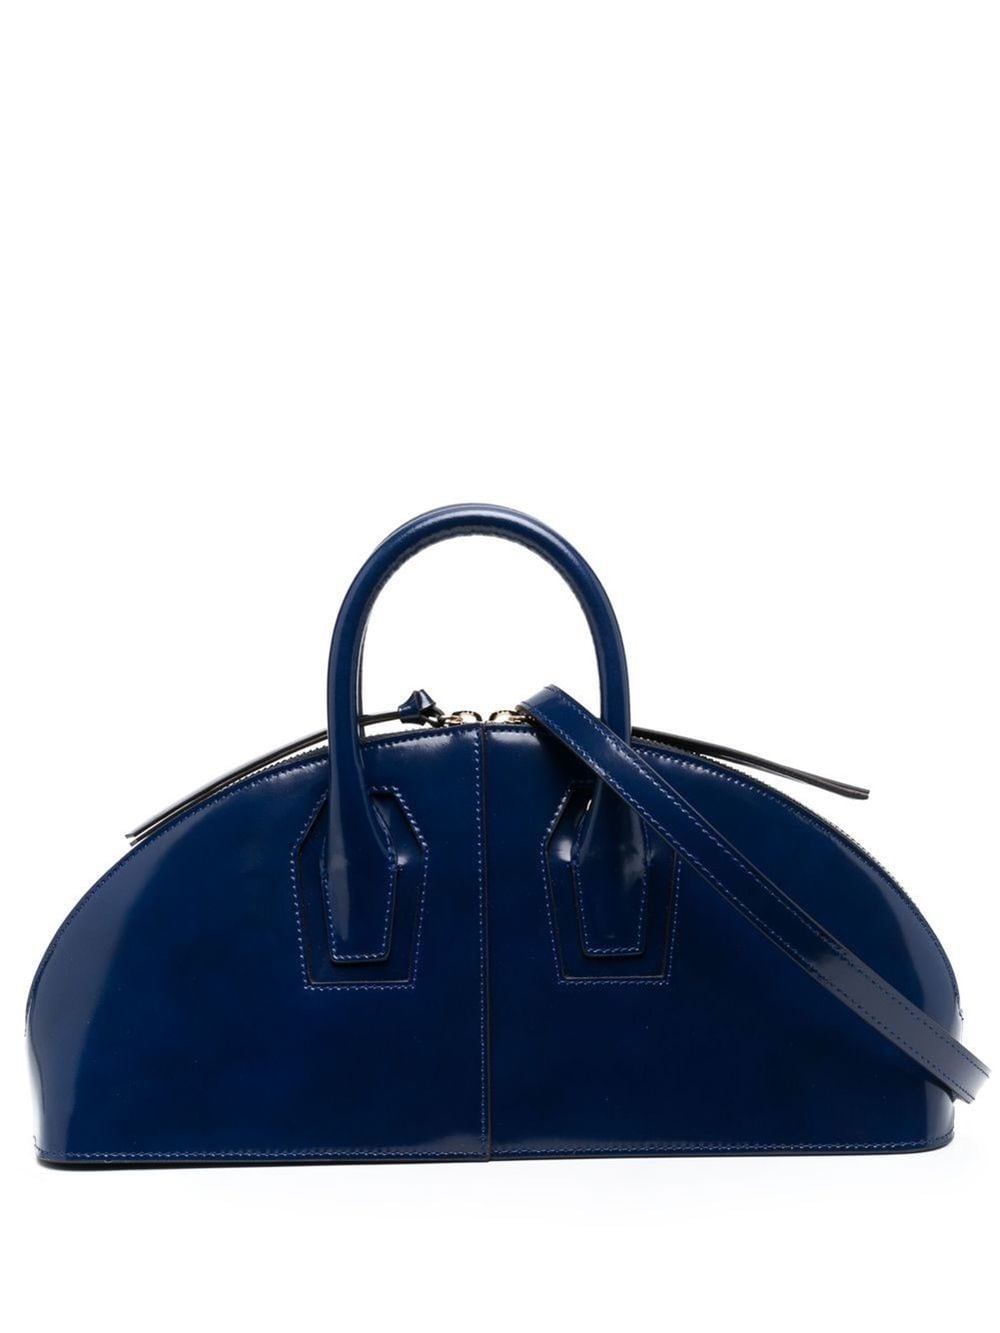 Oui Oui New Mercy Grained Tote Bag In Blue